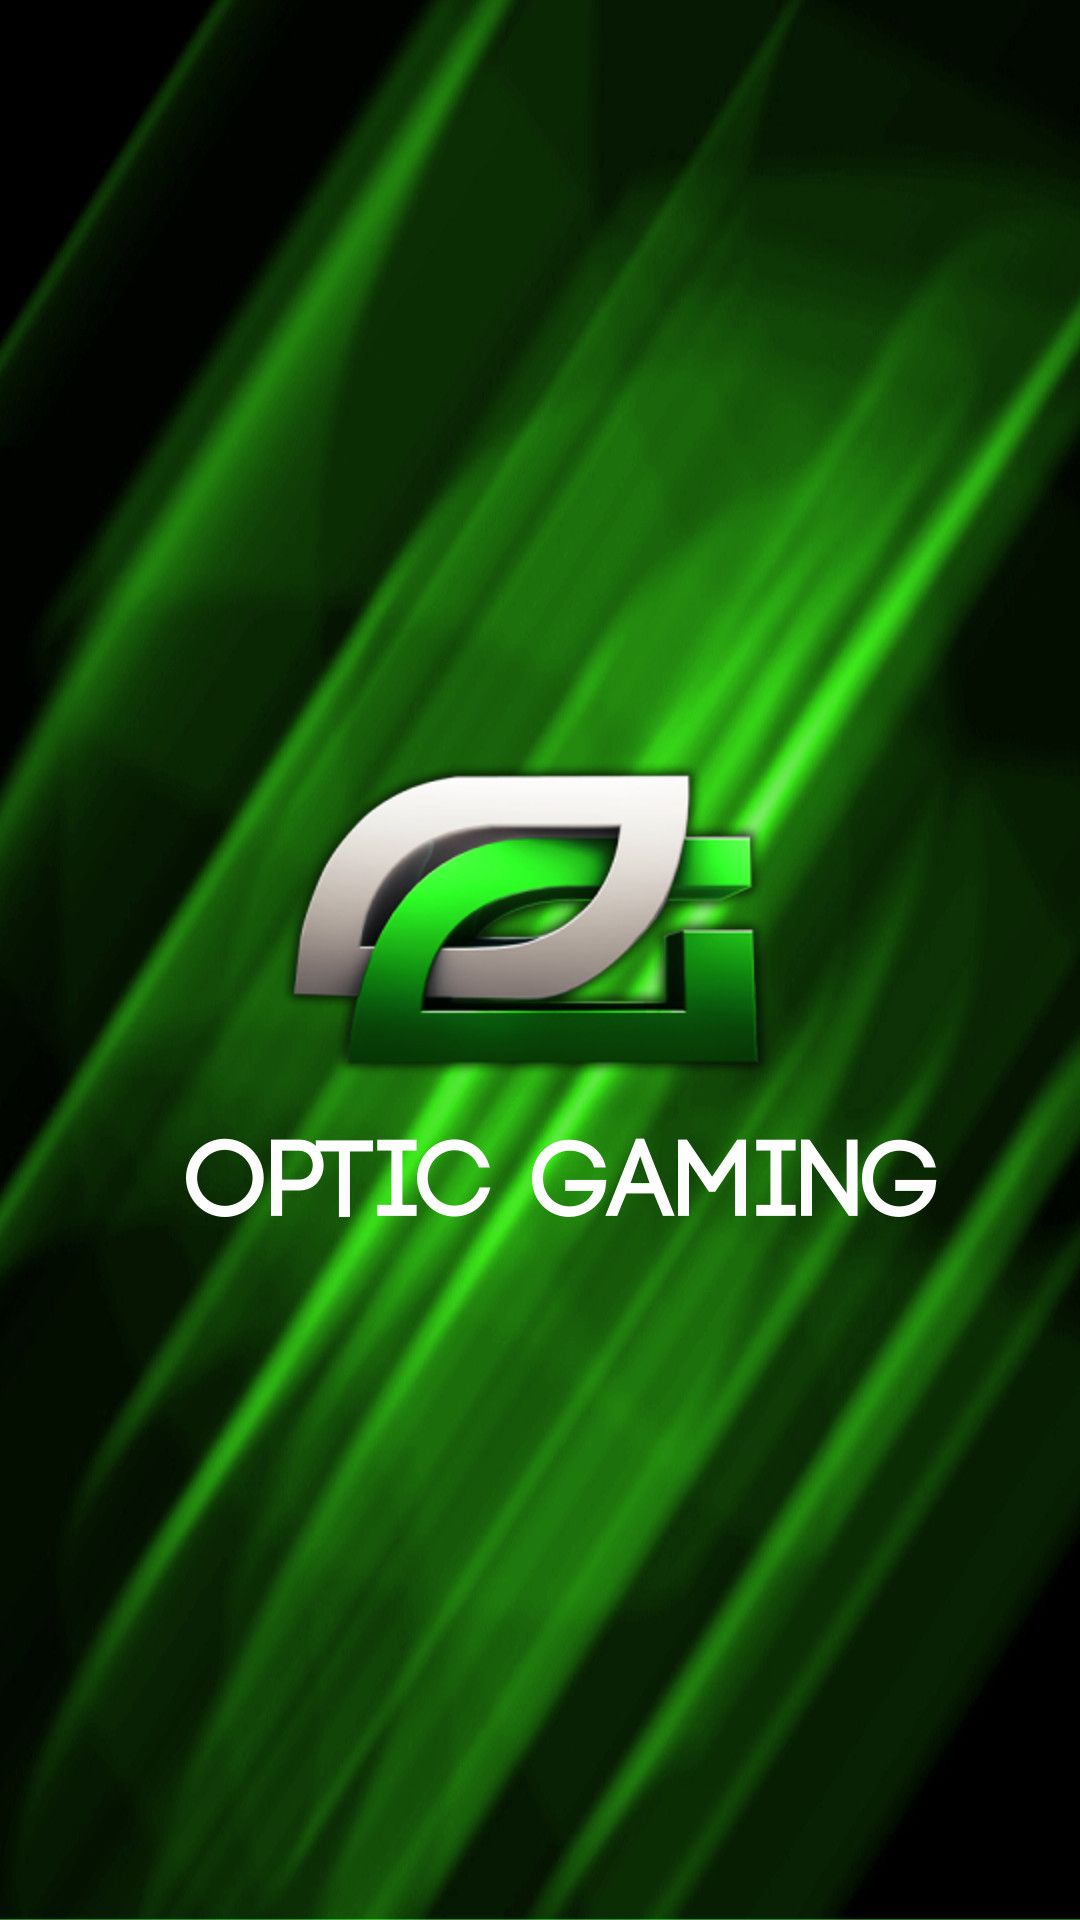 OpTic Texas PC Wallpaper I made from scratch 2560x1440 : r/OpTicGaming